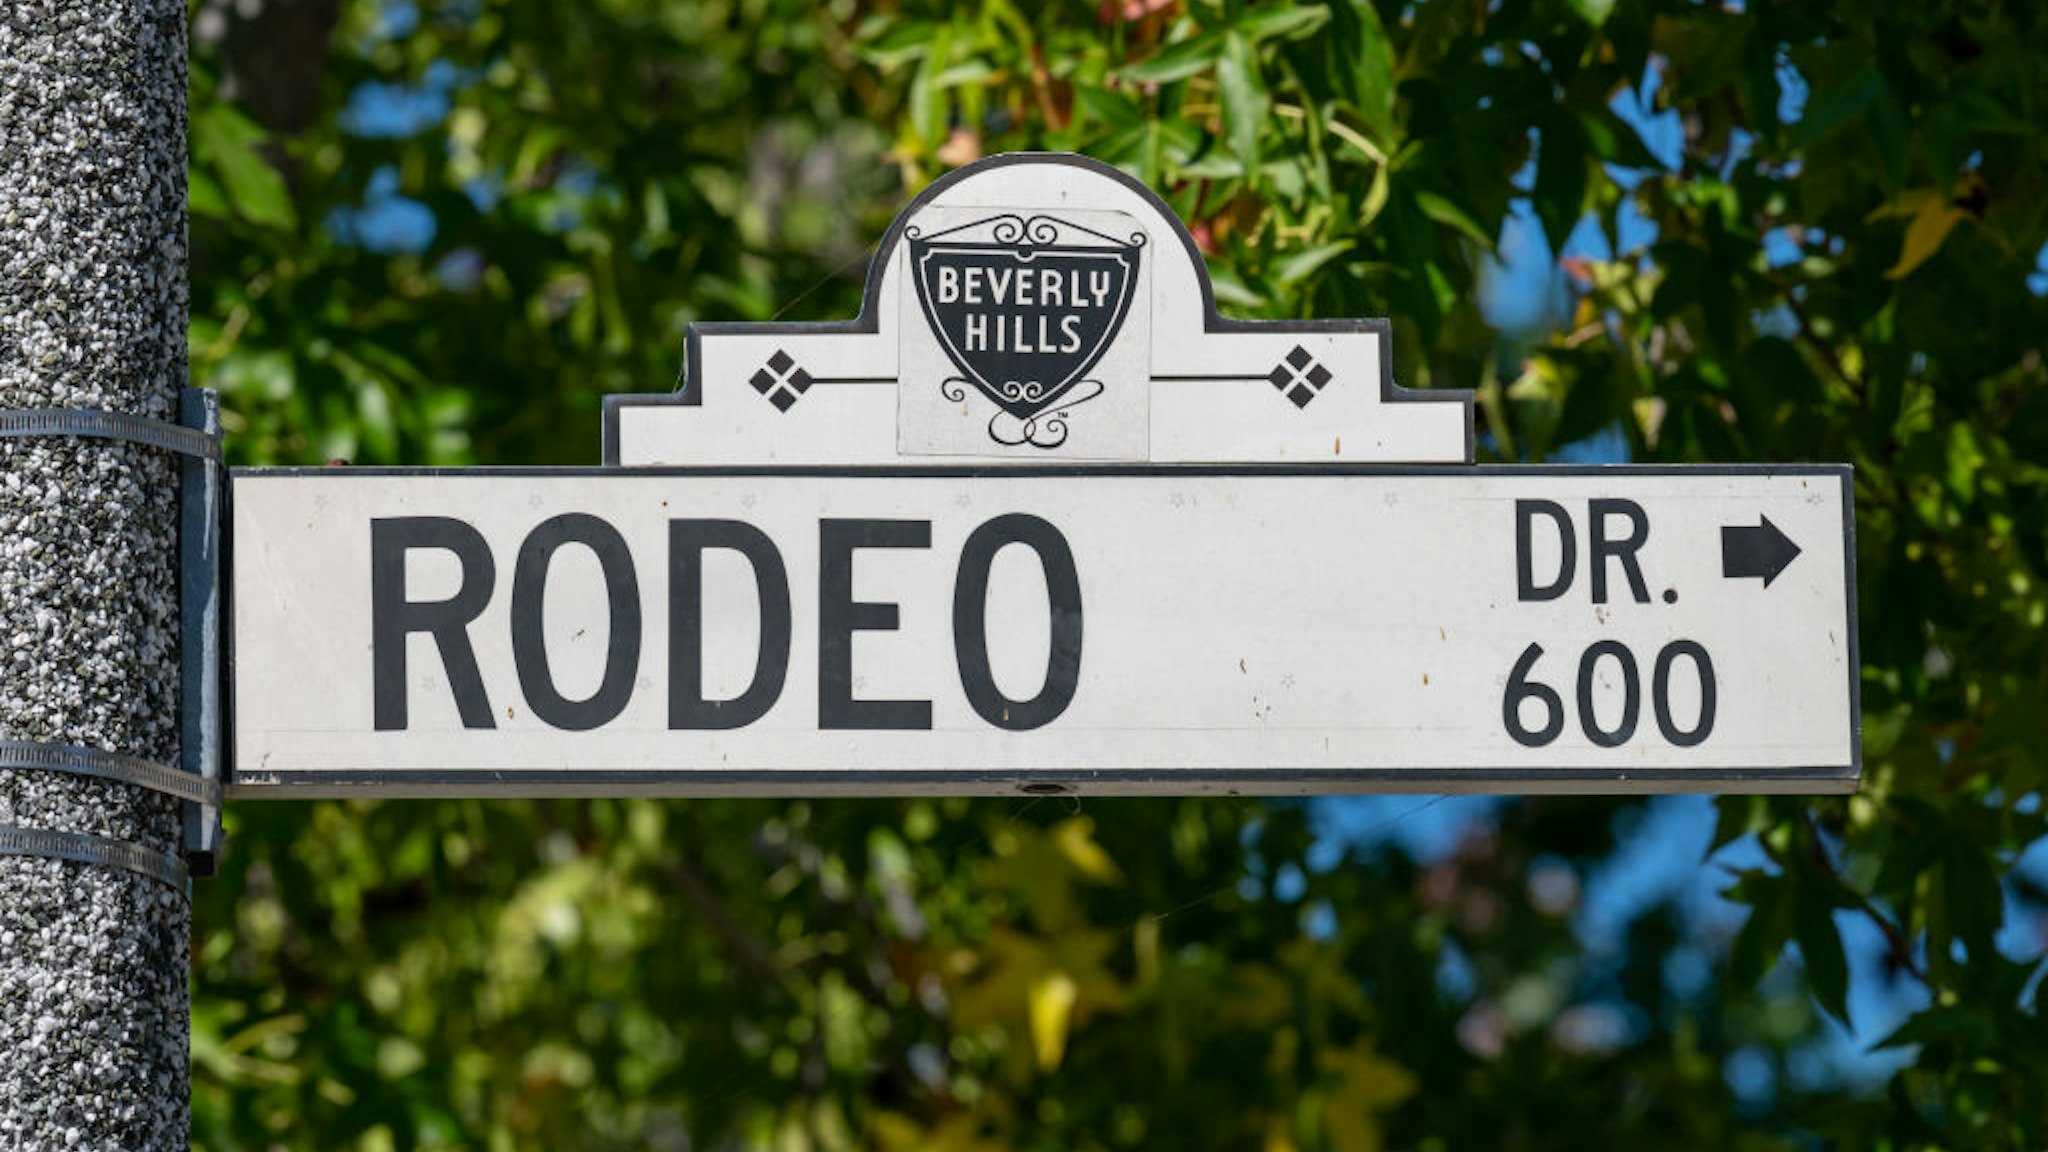 View of Rodeo Drive street sign is seen in Beverly Hills on July 30, 2020 in Los Angeles, California. (Photo by RBL/Bauer-Griffin/GC Images)